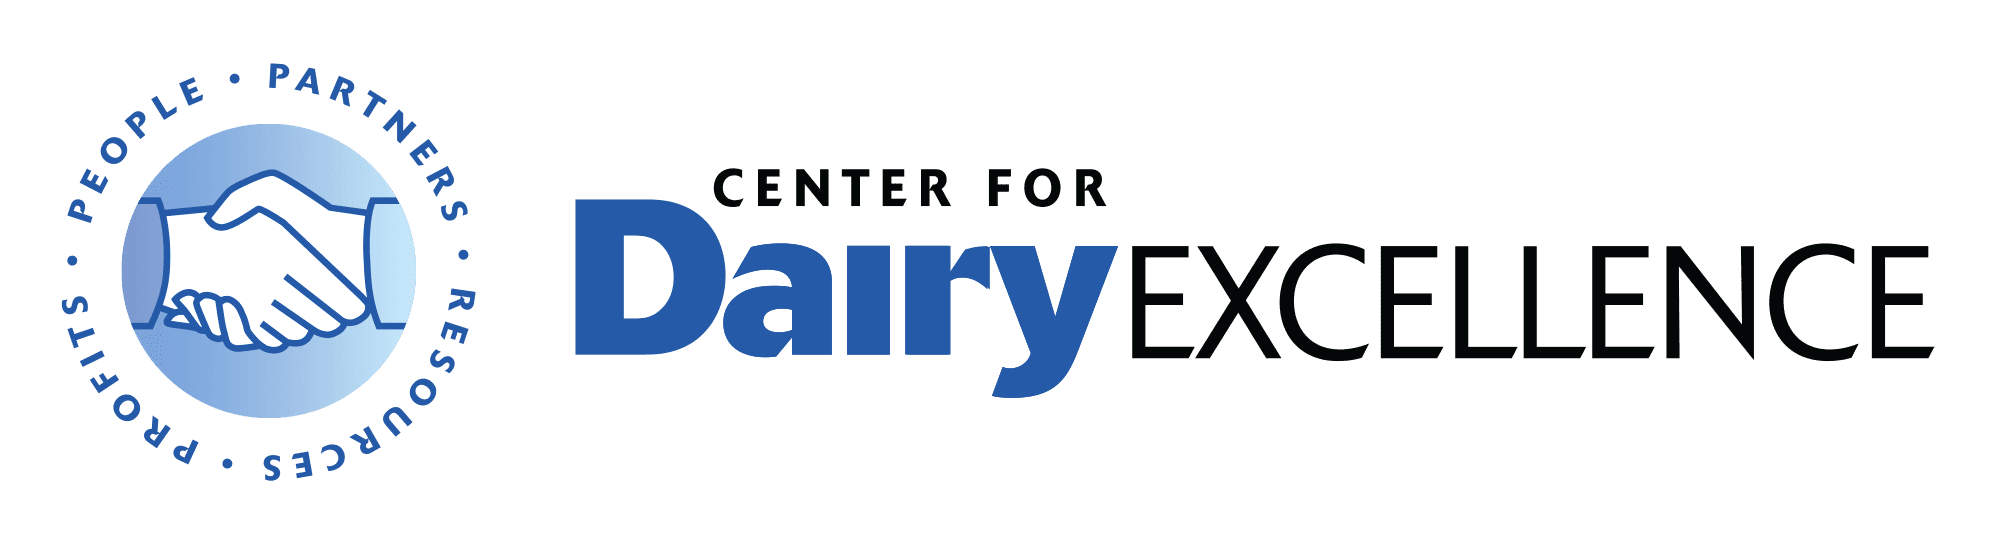 PASA Event Sponsorship from https://www.centerfordairyexcellence.org/